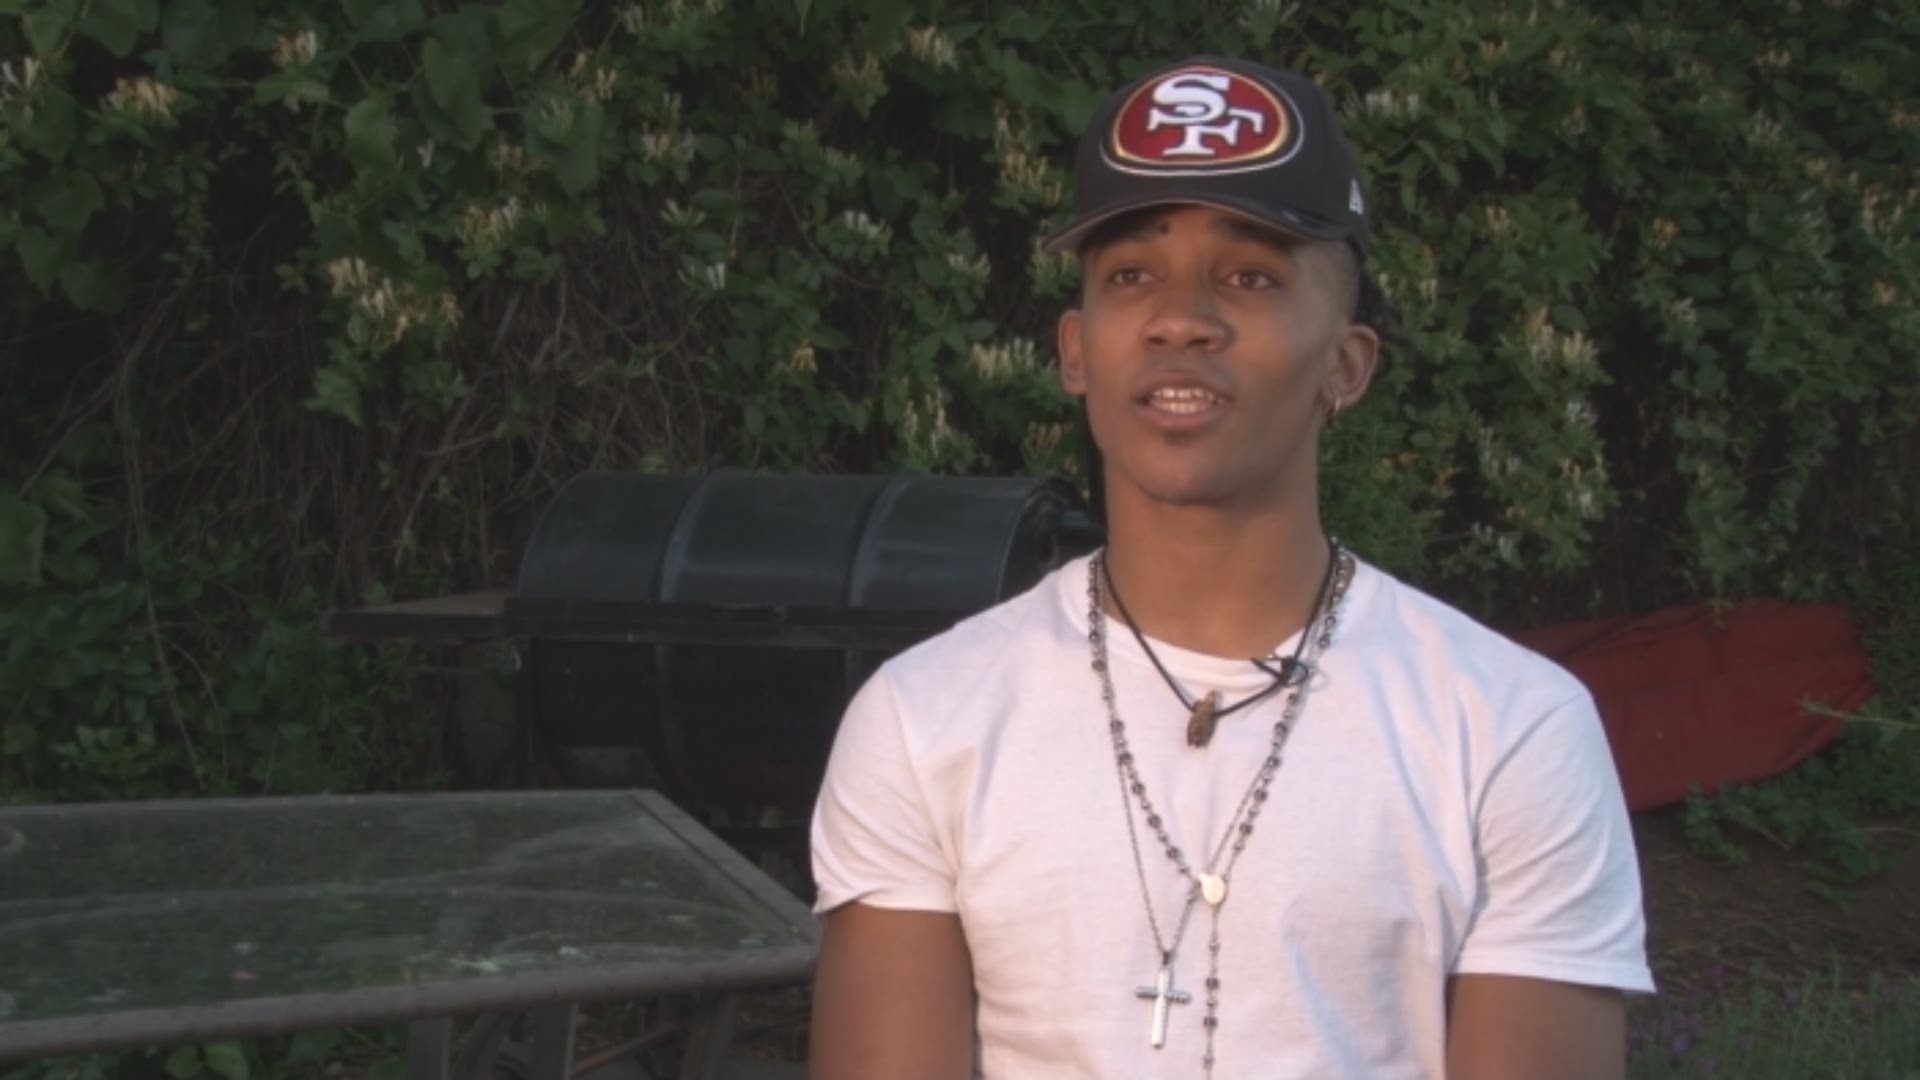 Colorado cornerback and former Christian Brothers high school star Ahkello Witherspoon talks to ABC10's Sean Cunningham about hearing his name called by the San Francisco 49ers on Friday during the third round of the NFL Draft.